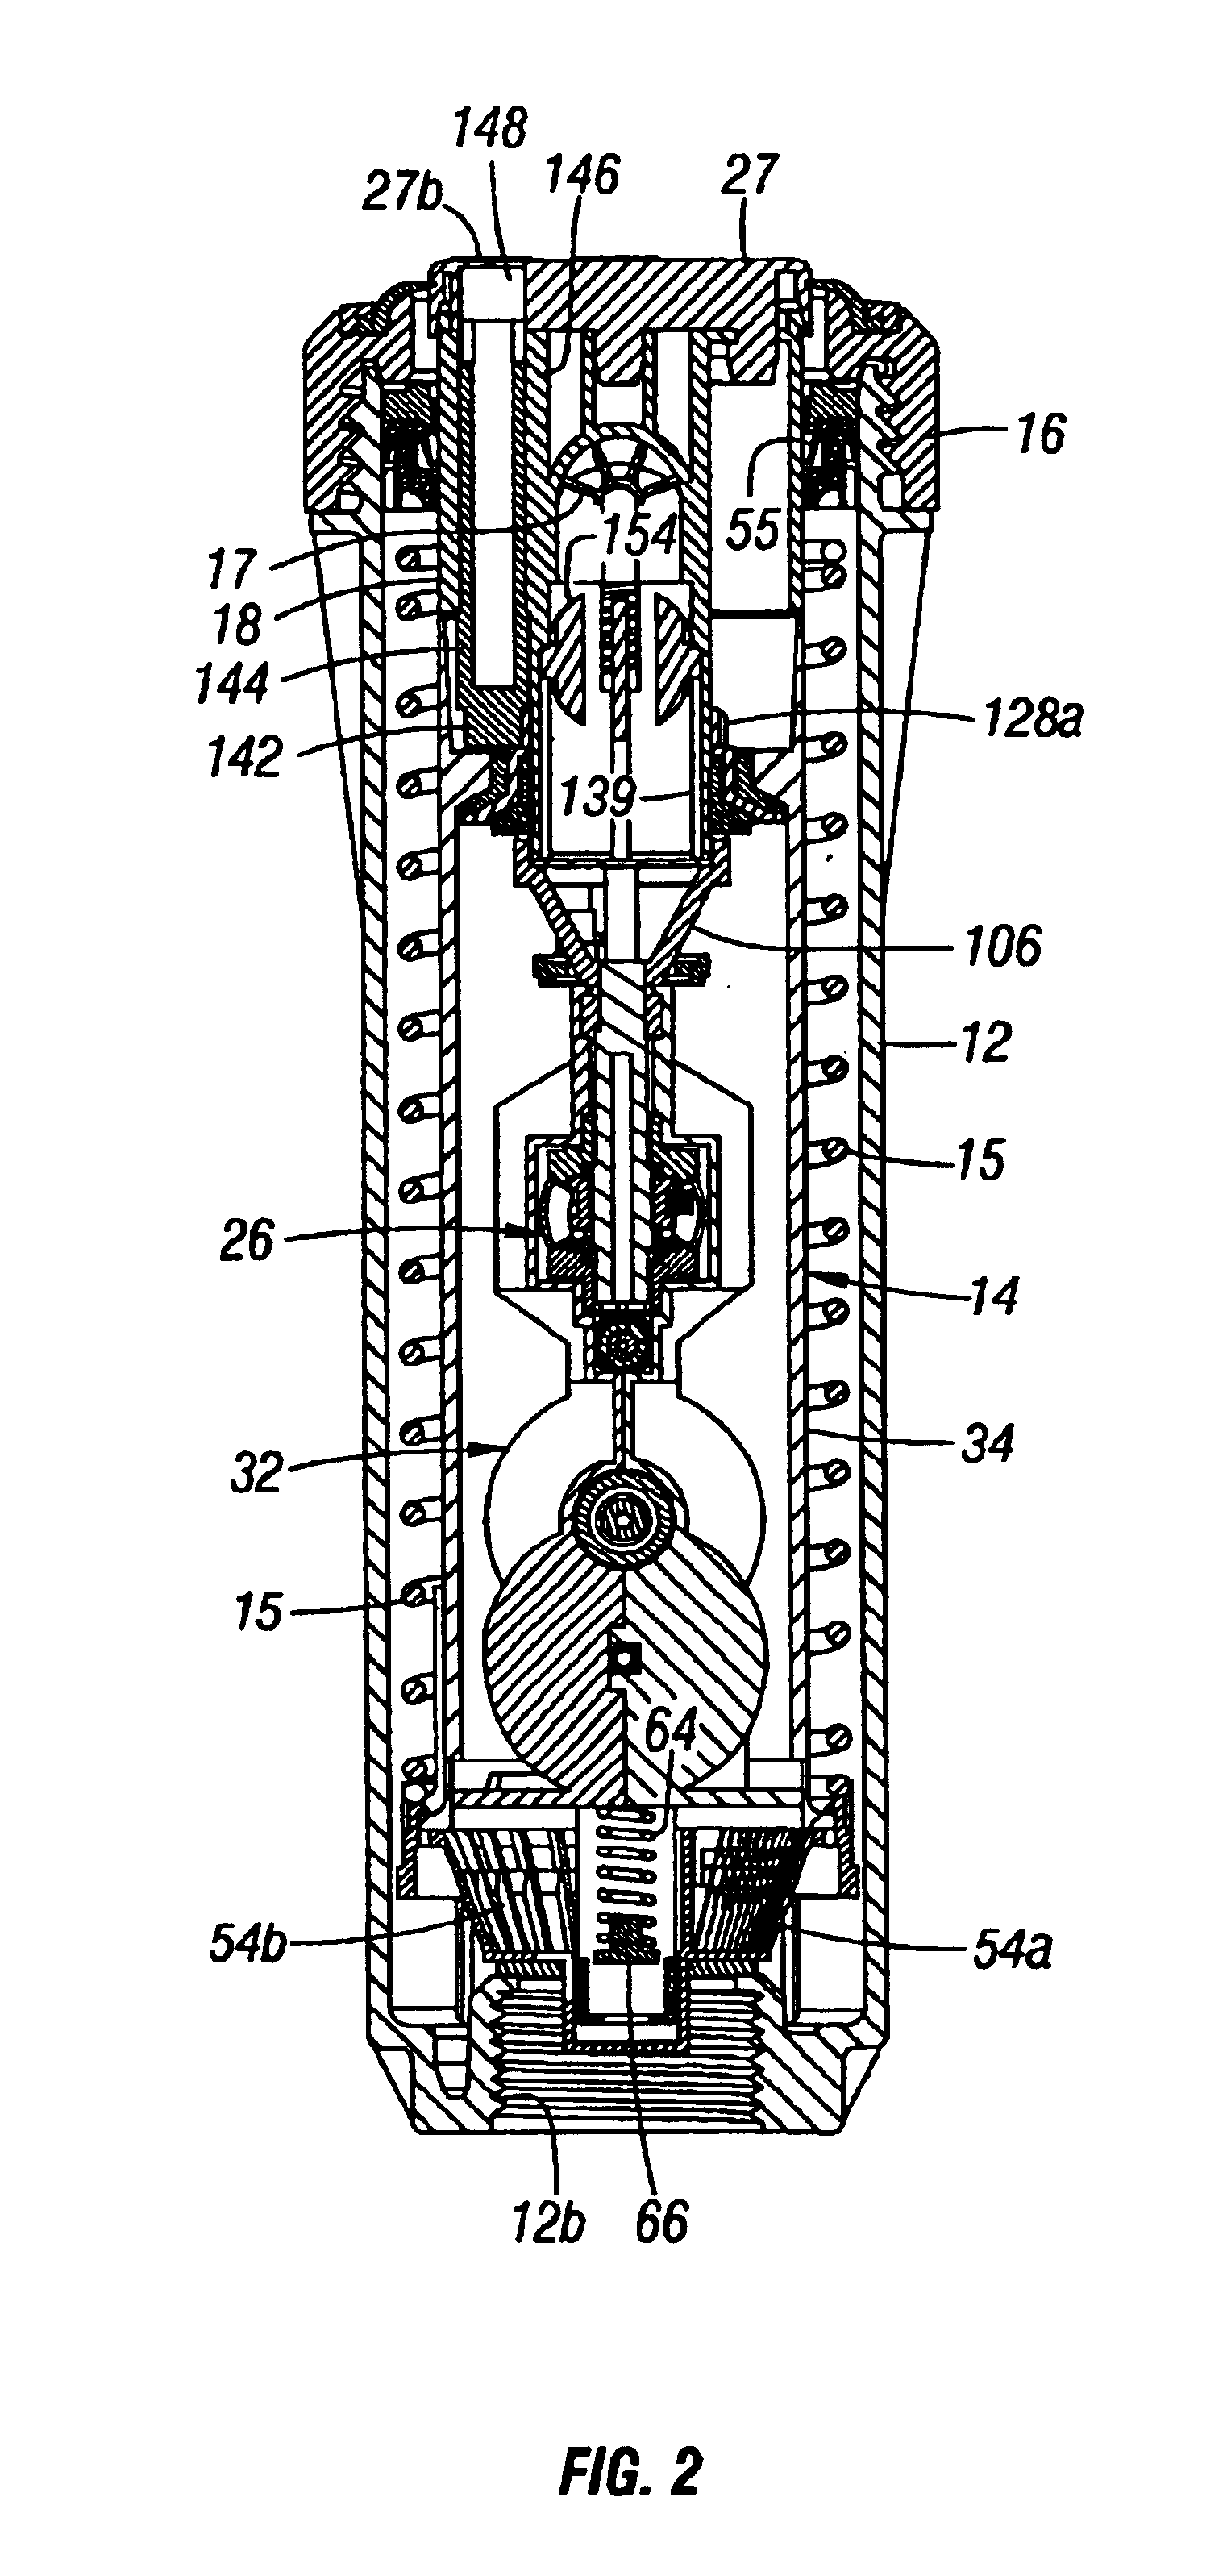 Rotor type sprinkler with insertable drive subassembly including horizontal turbine and reversing mechanism